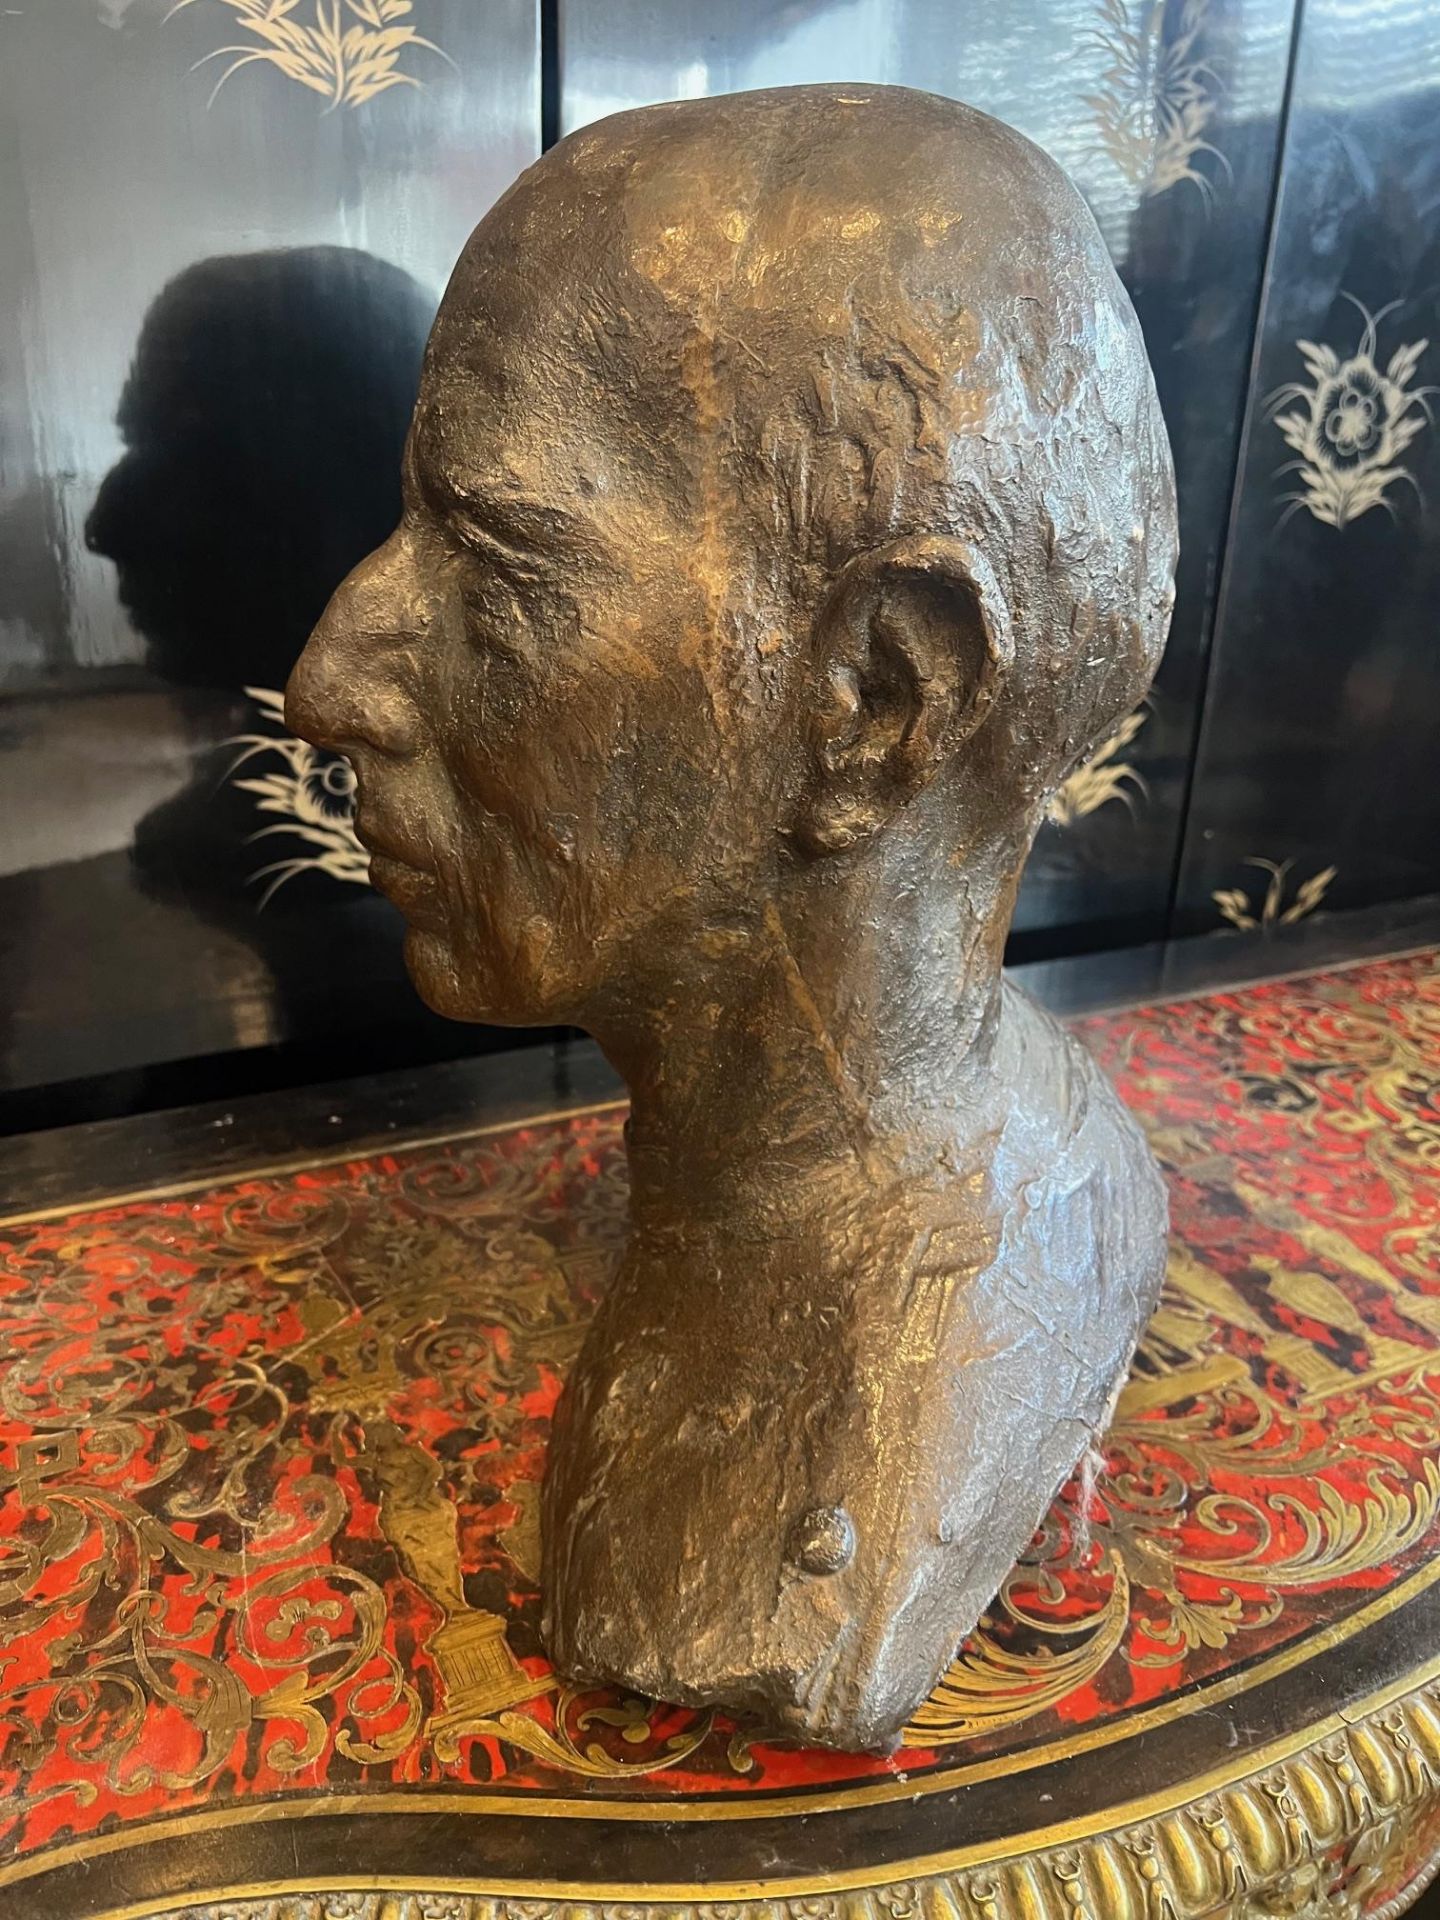 A LARGE 20TH CENTURY BRONZE PORTRAIT BUST OF A MAN - Image 4 of 6